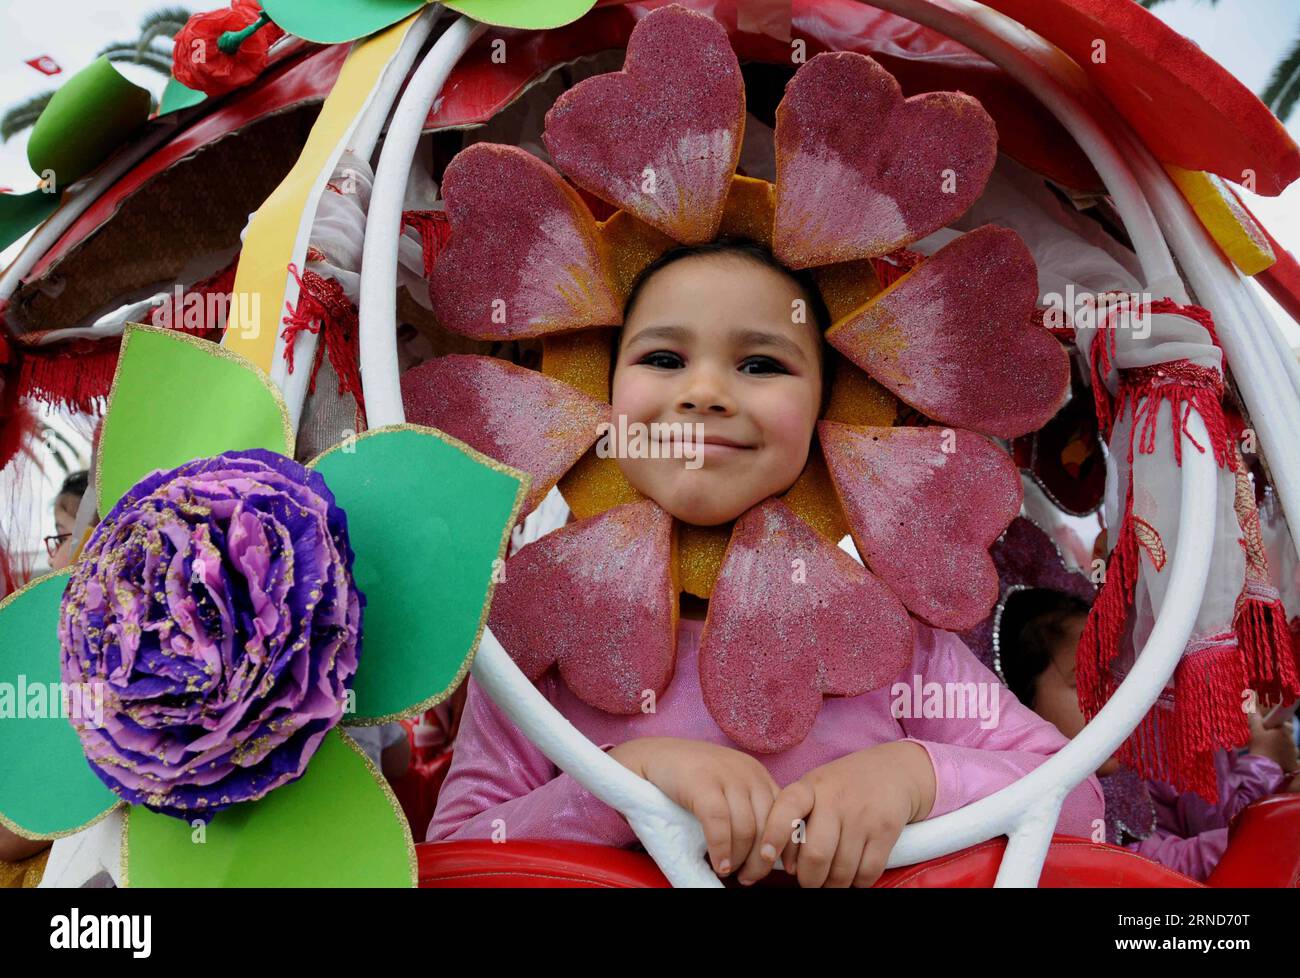 (160506) -- TUNIS, May 6, 2016 -- A Tunisian girl takes part in the 20th Rose Festival in Tunis, Tunisia on May 6, 2016. Rose Festival is a local festival to welcome spring. ) TUNISIA-TUNIS-ROSE FESTIVAL AdelxEzzine PUBLICATIONxNOTxINxCHN   160506 Tunis May 6 2016 a Tunisian Girl Takes Part in The 20th Rose Festival in Tunis Tunisia ON May 6 2016 Rose Festival IS a Local Festival to Welcome Spring Tunisia Tunis Rose Festival AdelxEzzine PUBLICATIONxNOTxINxCHN Stock Photo